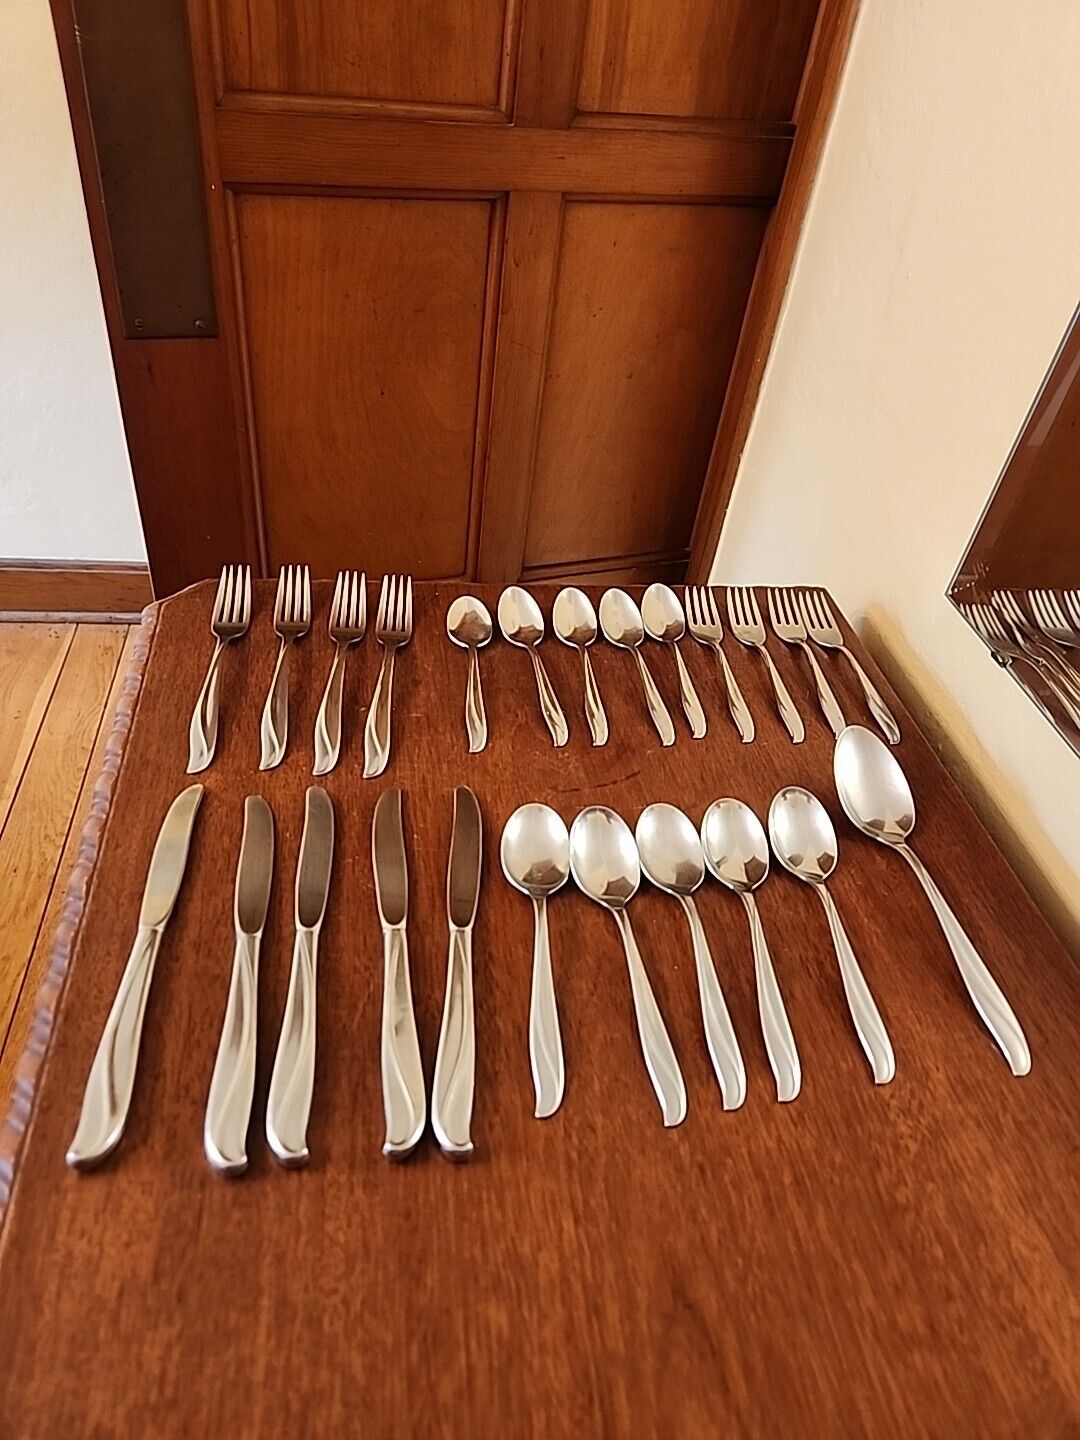 Wm Rogers  Impression  USA Lot Of 24 IS  Stainless Flatware Assorted Pieces